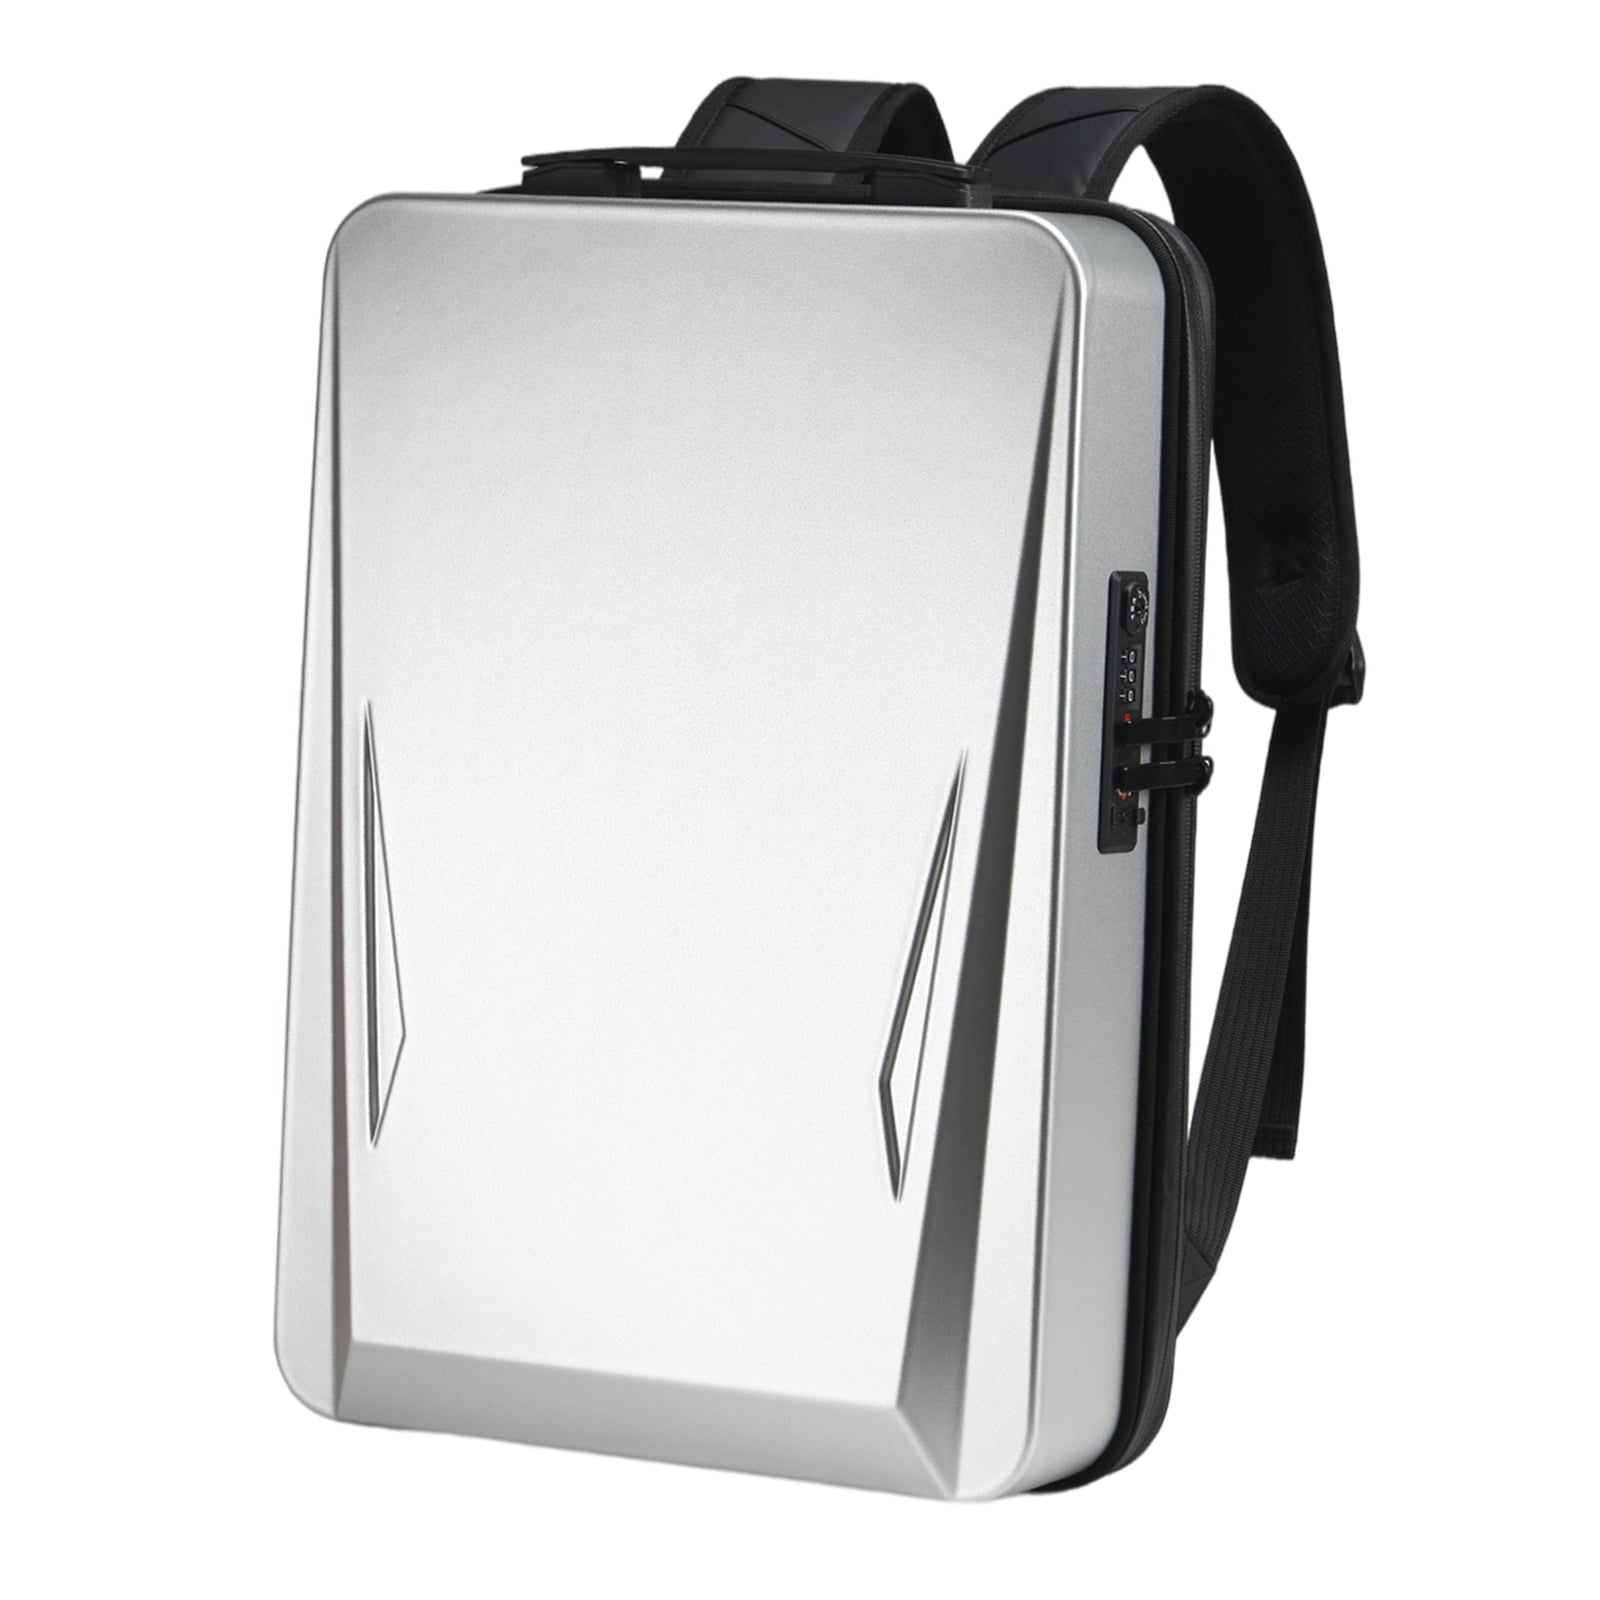 Welaso Smart WiFi LED Backpack 24L with Colorful LED Sign Panel 